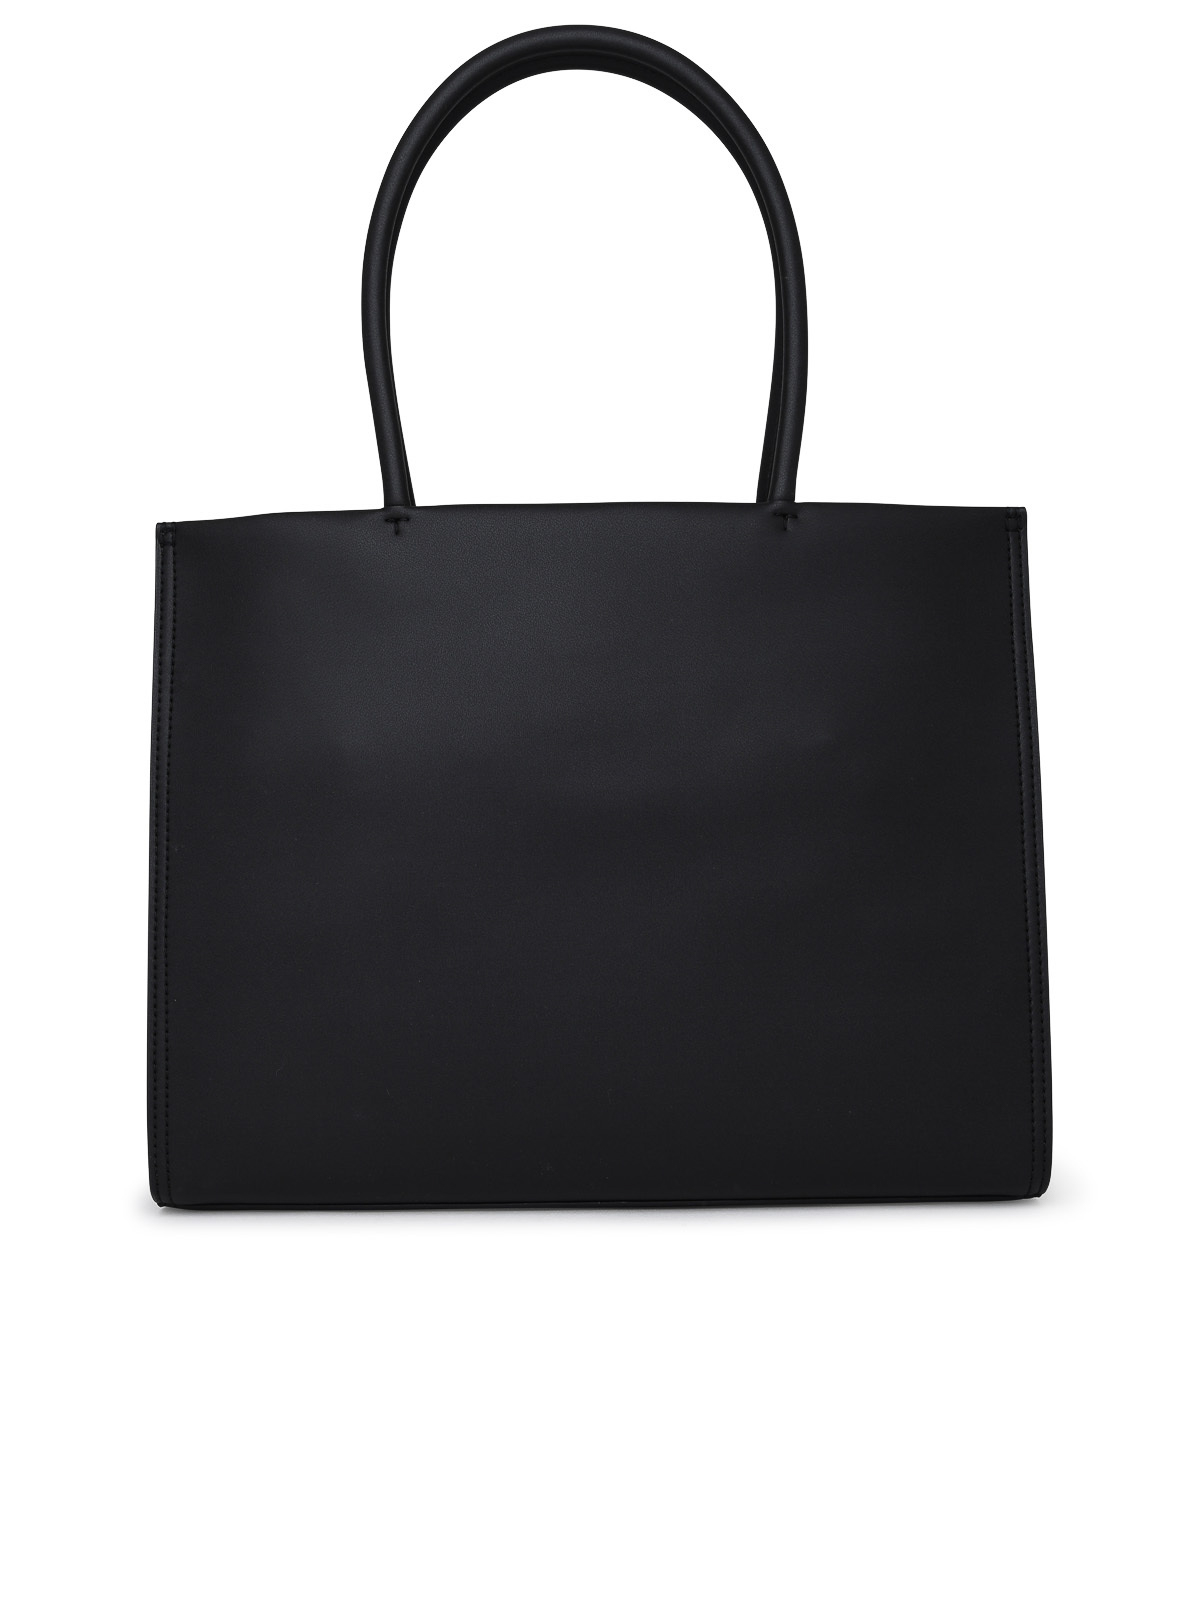 TORY BURCH: tote bags for woman - Black